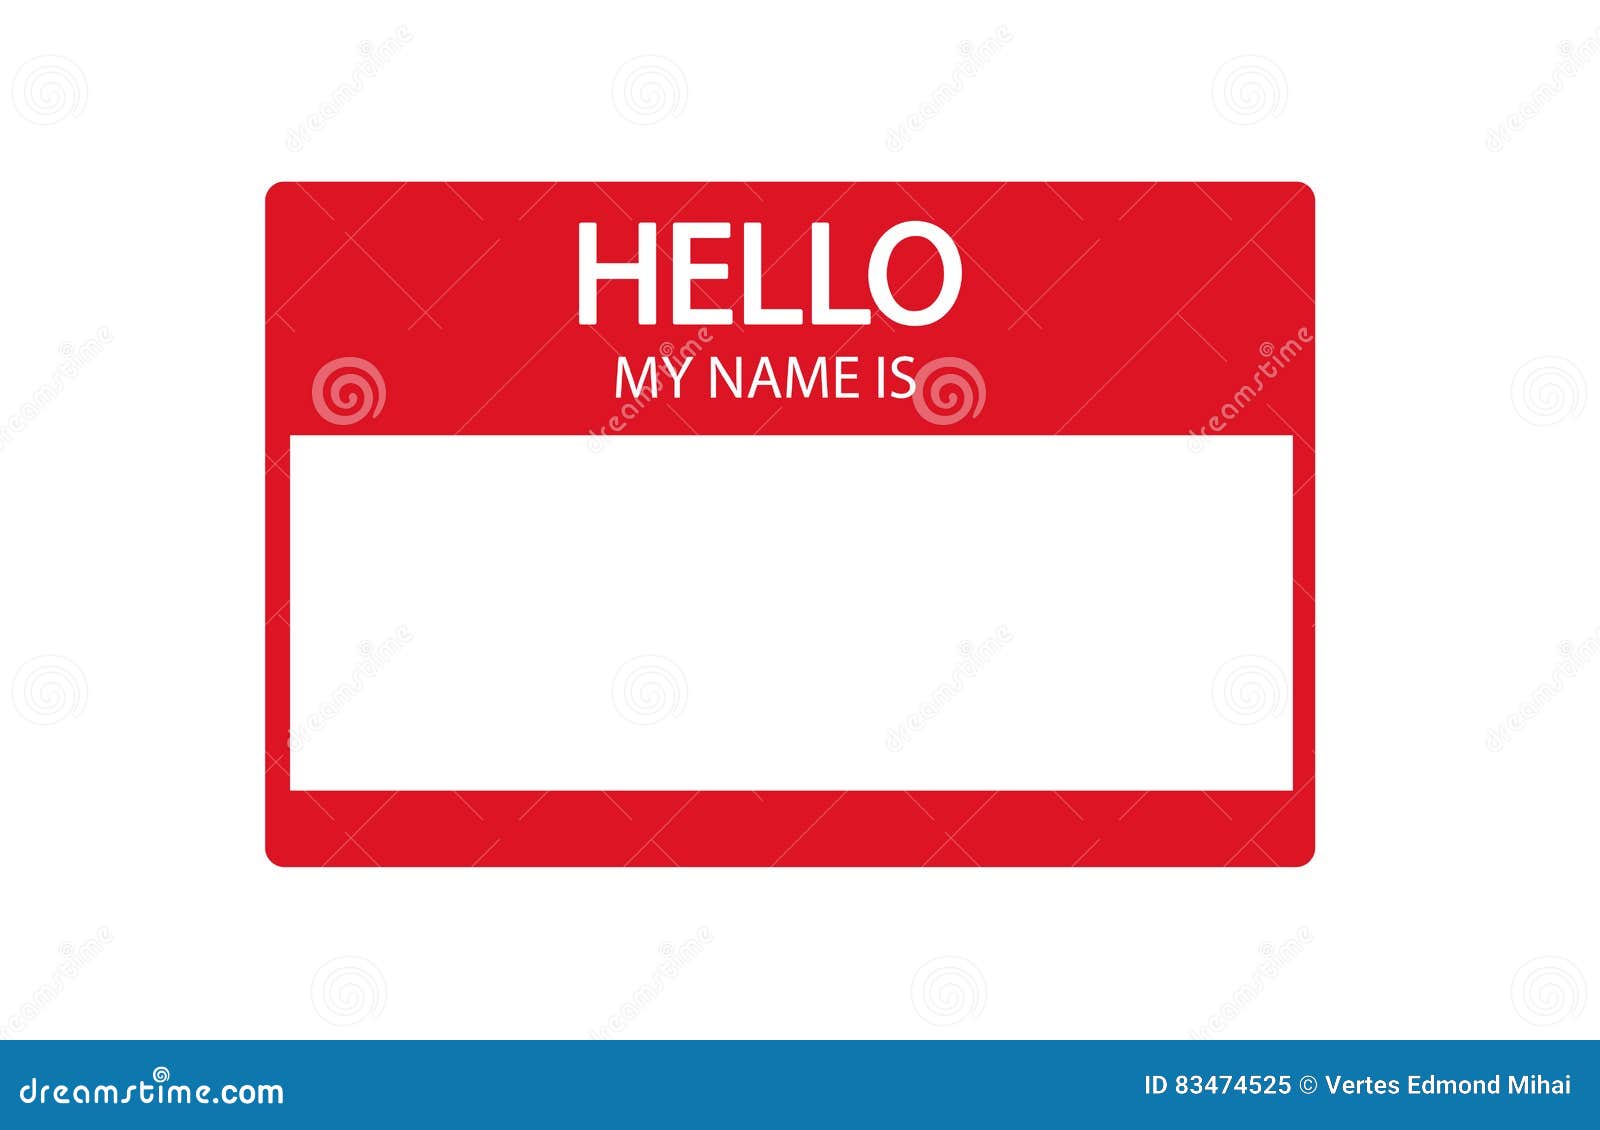 hello, my name is introduction red flat label